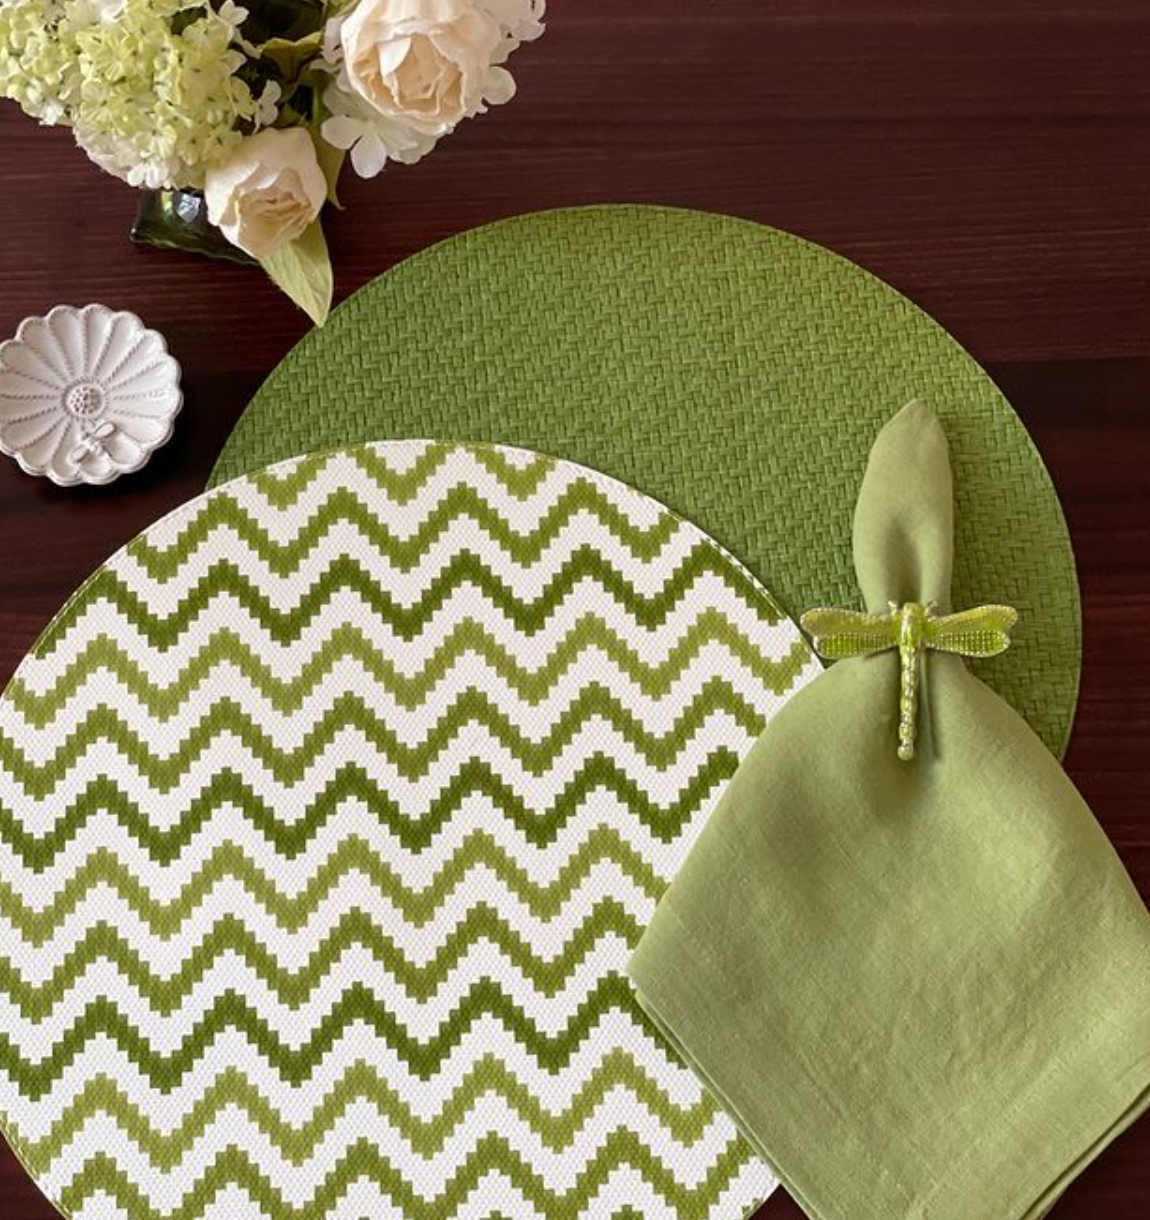 Wicker Round Placemat Green Set of 4